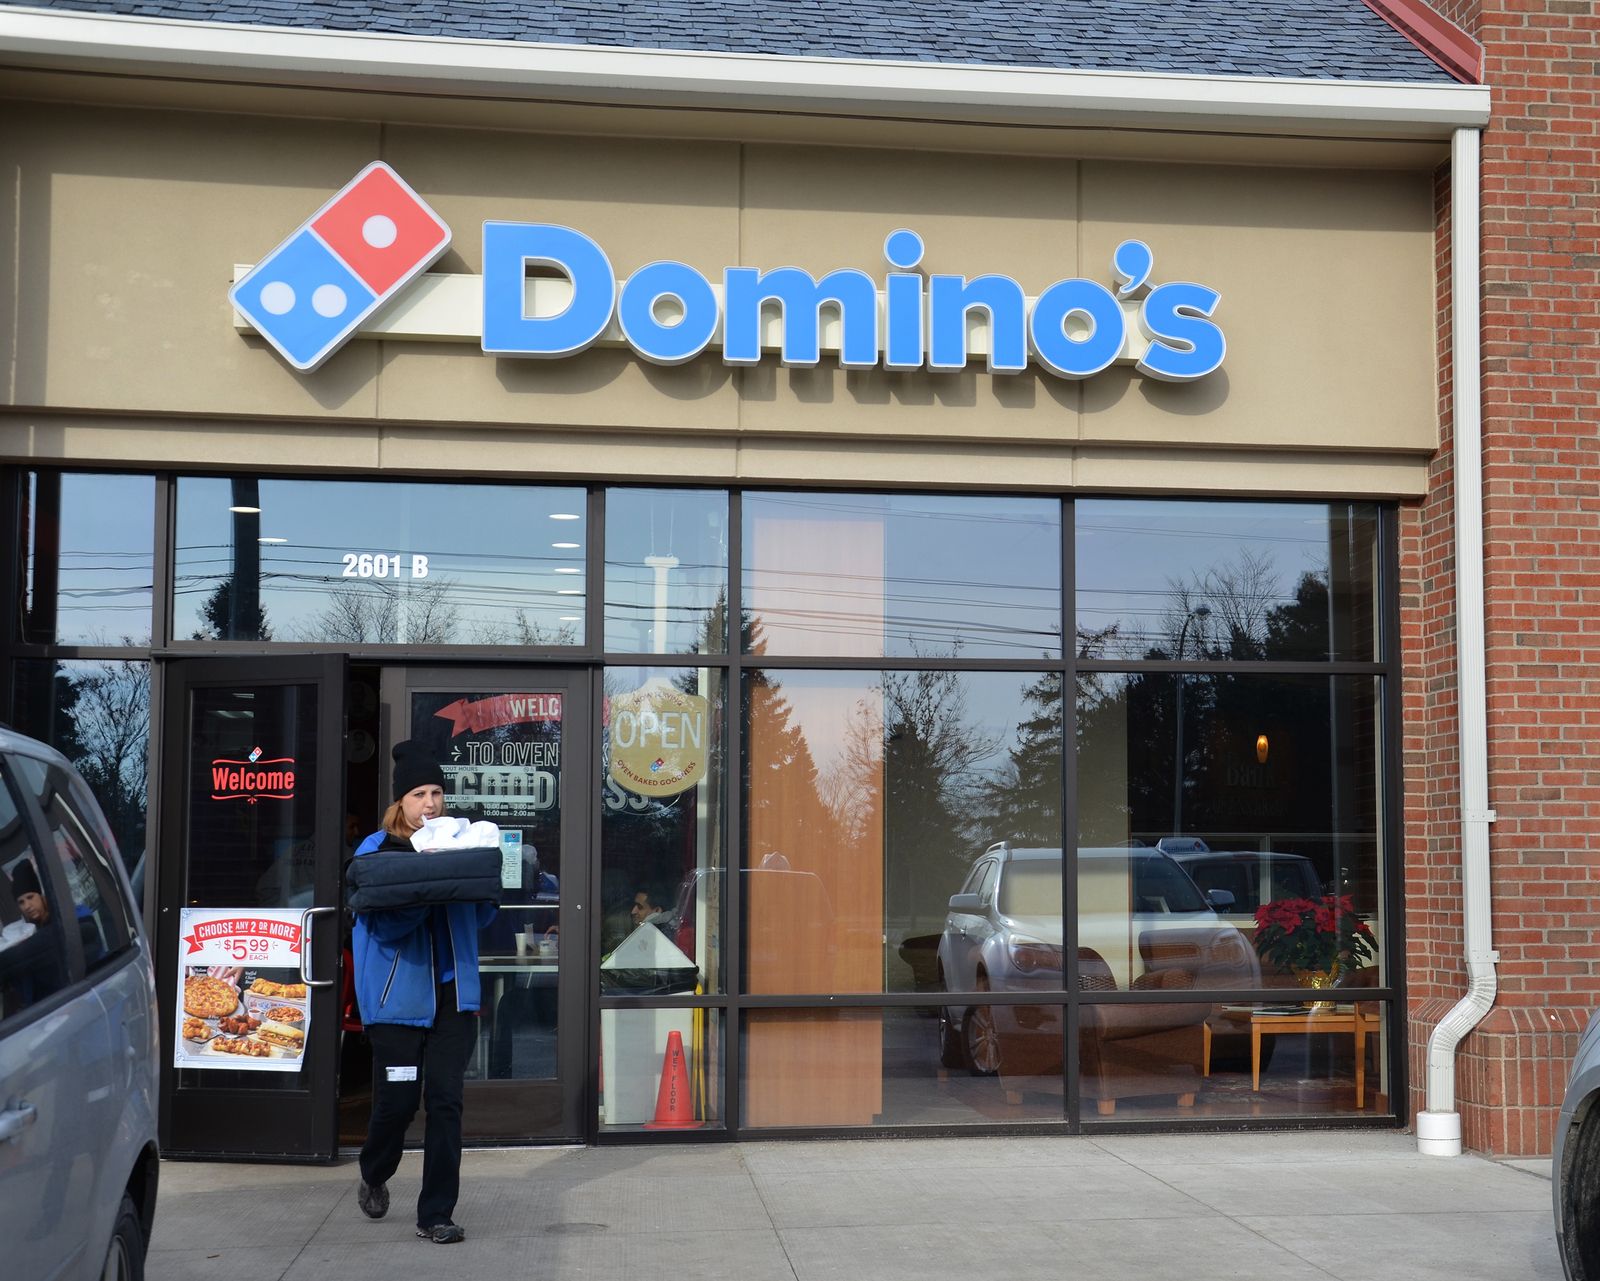 Domino's new technology roll out, Danish growth booms